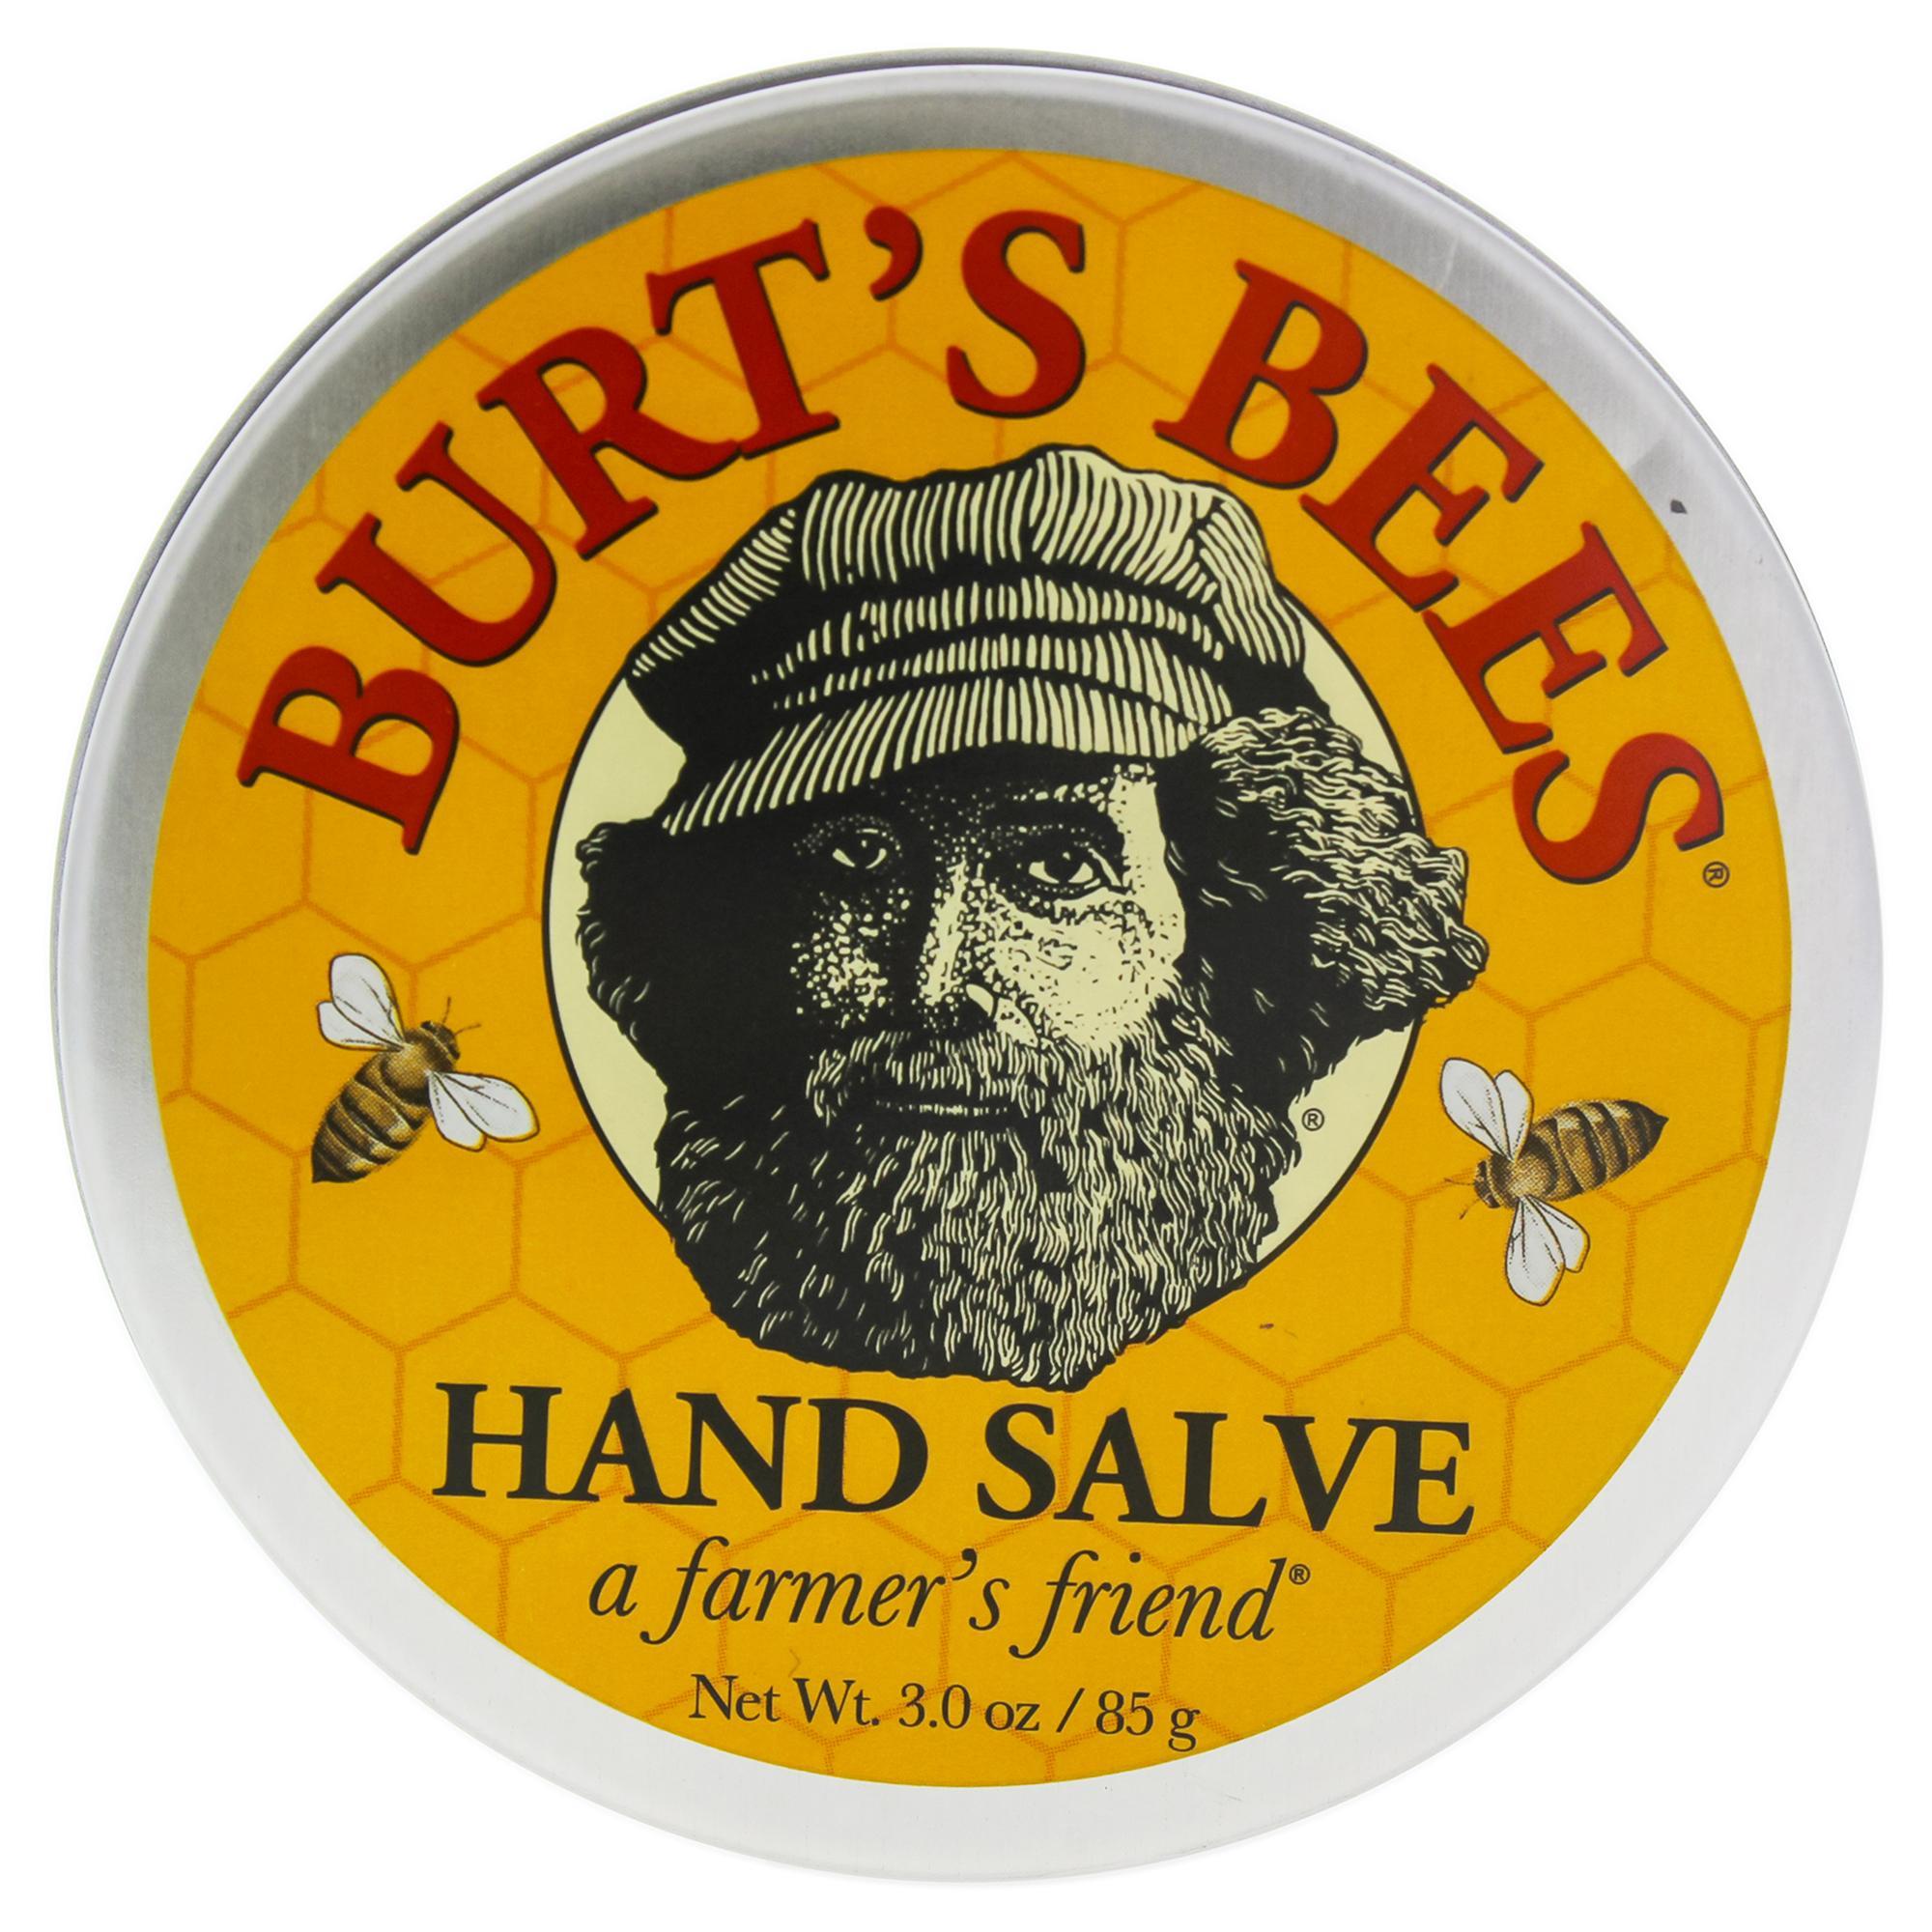 Hand Salve by Burts Bees for Unisex - 3 oz Cream